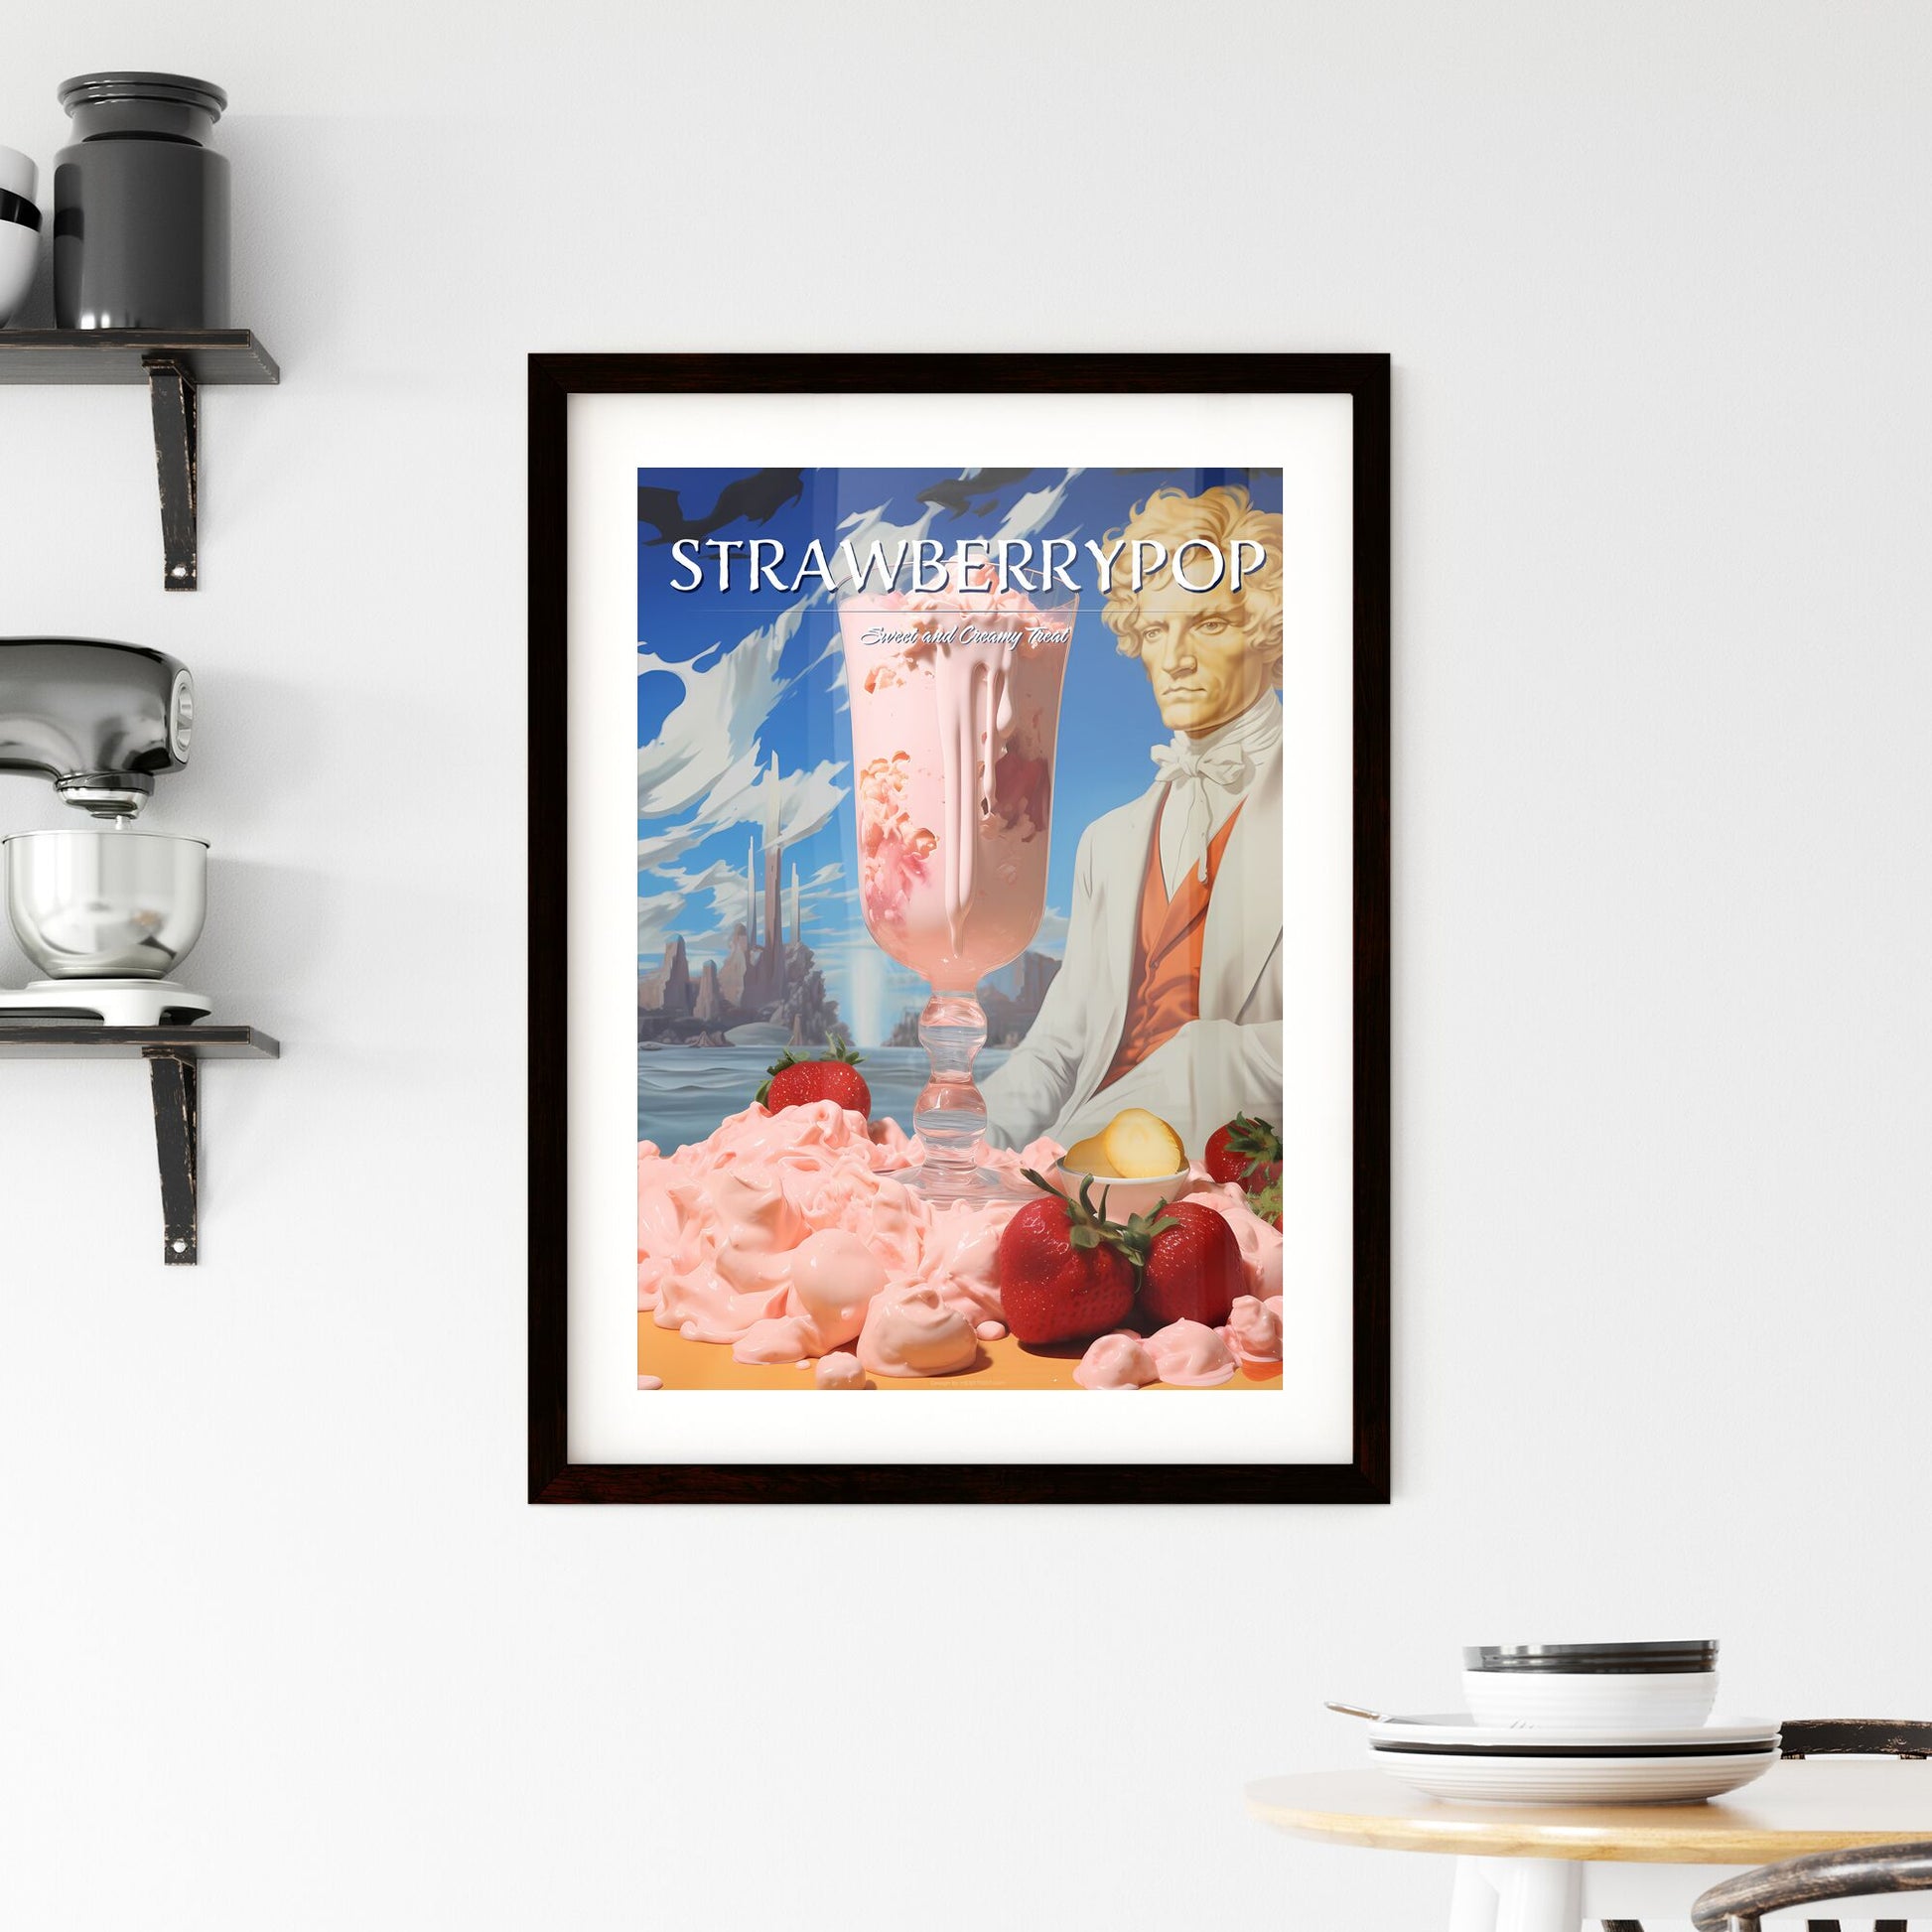 A Poster of strawberry milkshake - A Glass Of Pink Liquid With Strawberries And A Statue Of A Man Default Title